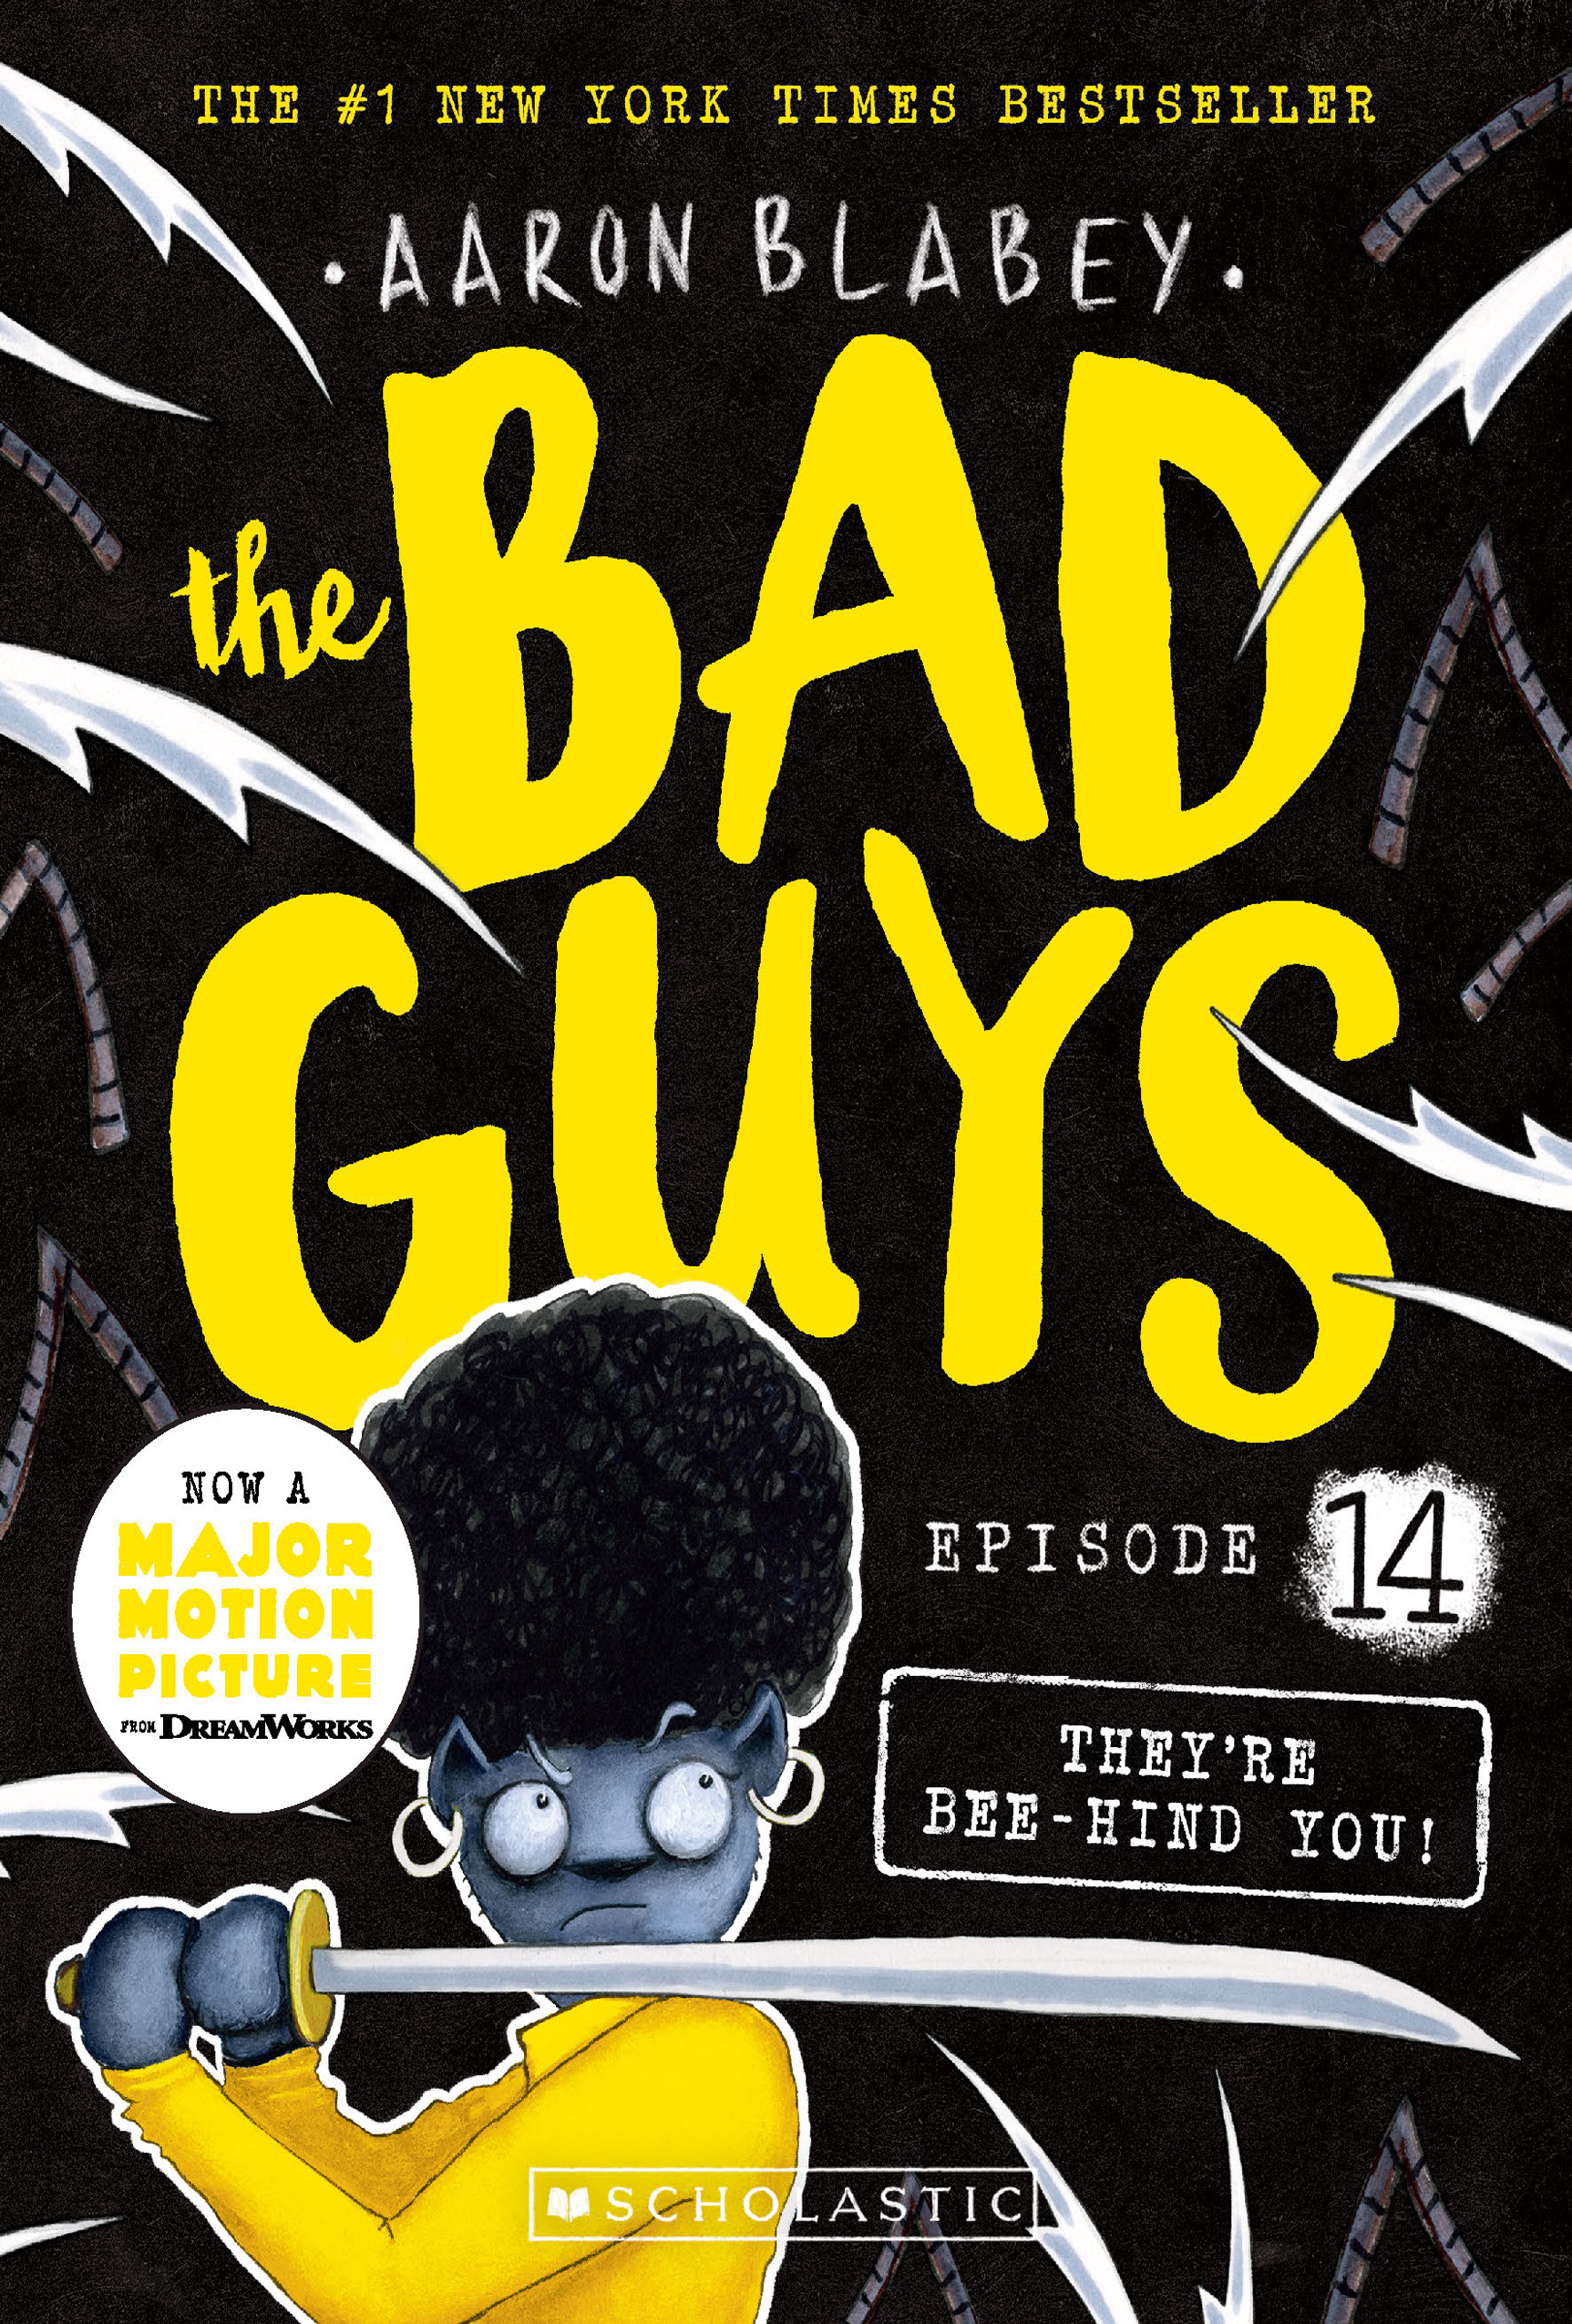 SC-The Bad Guys #14: They're Bee-hind You!